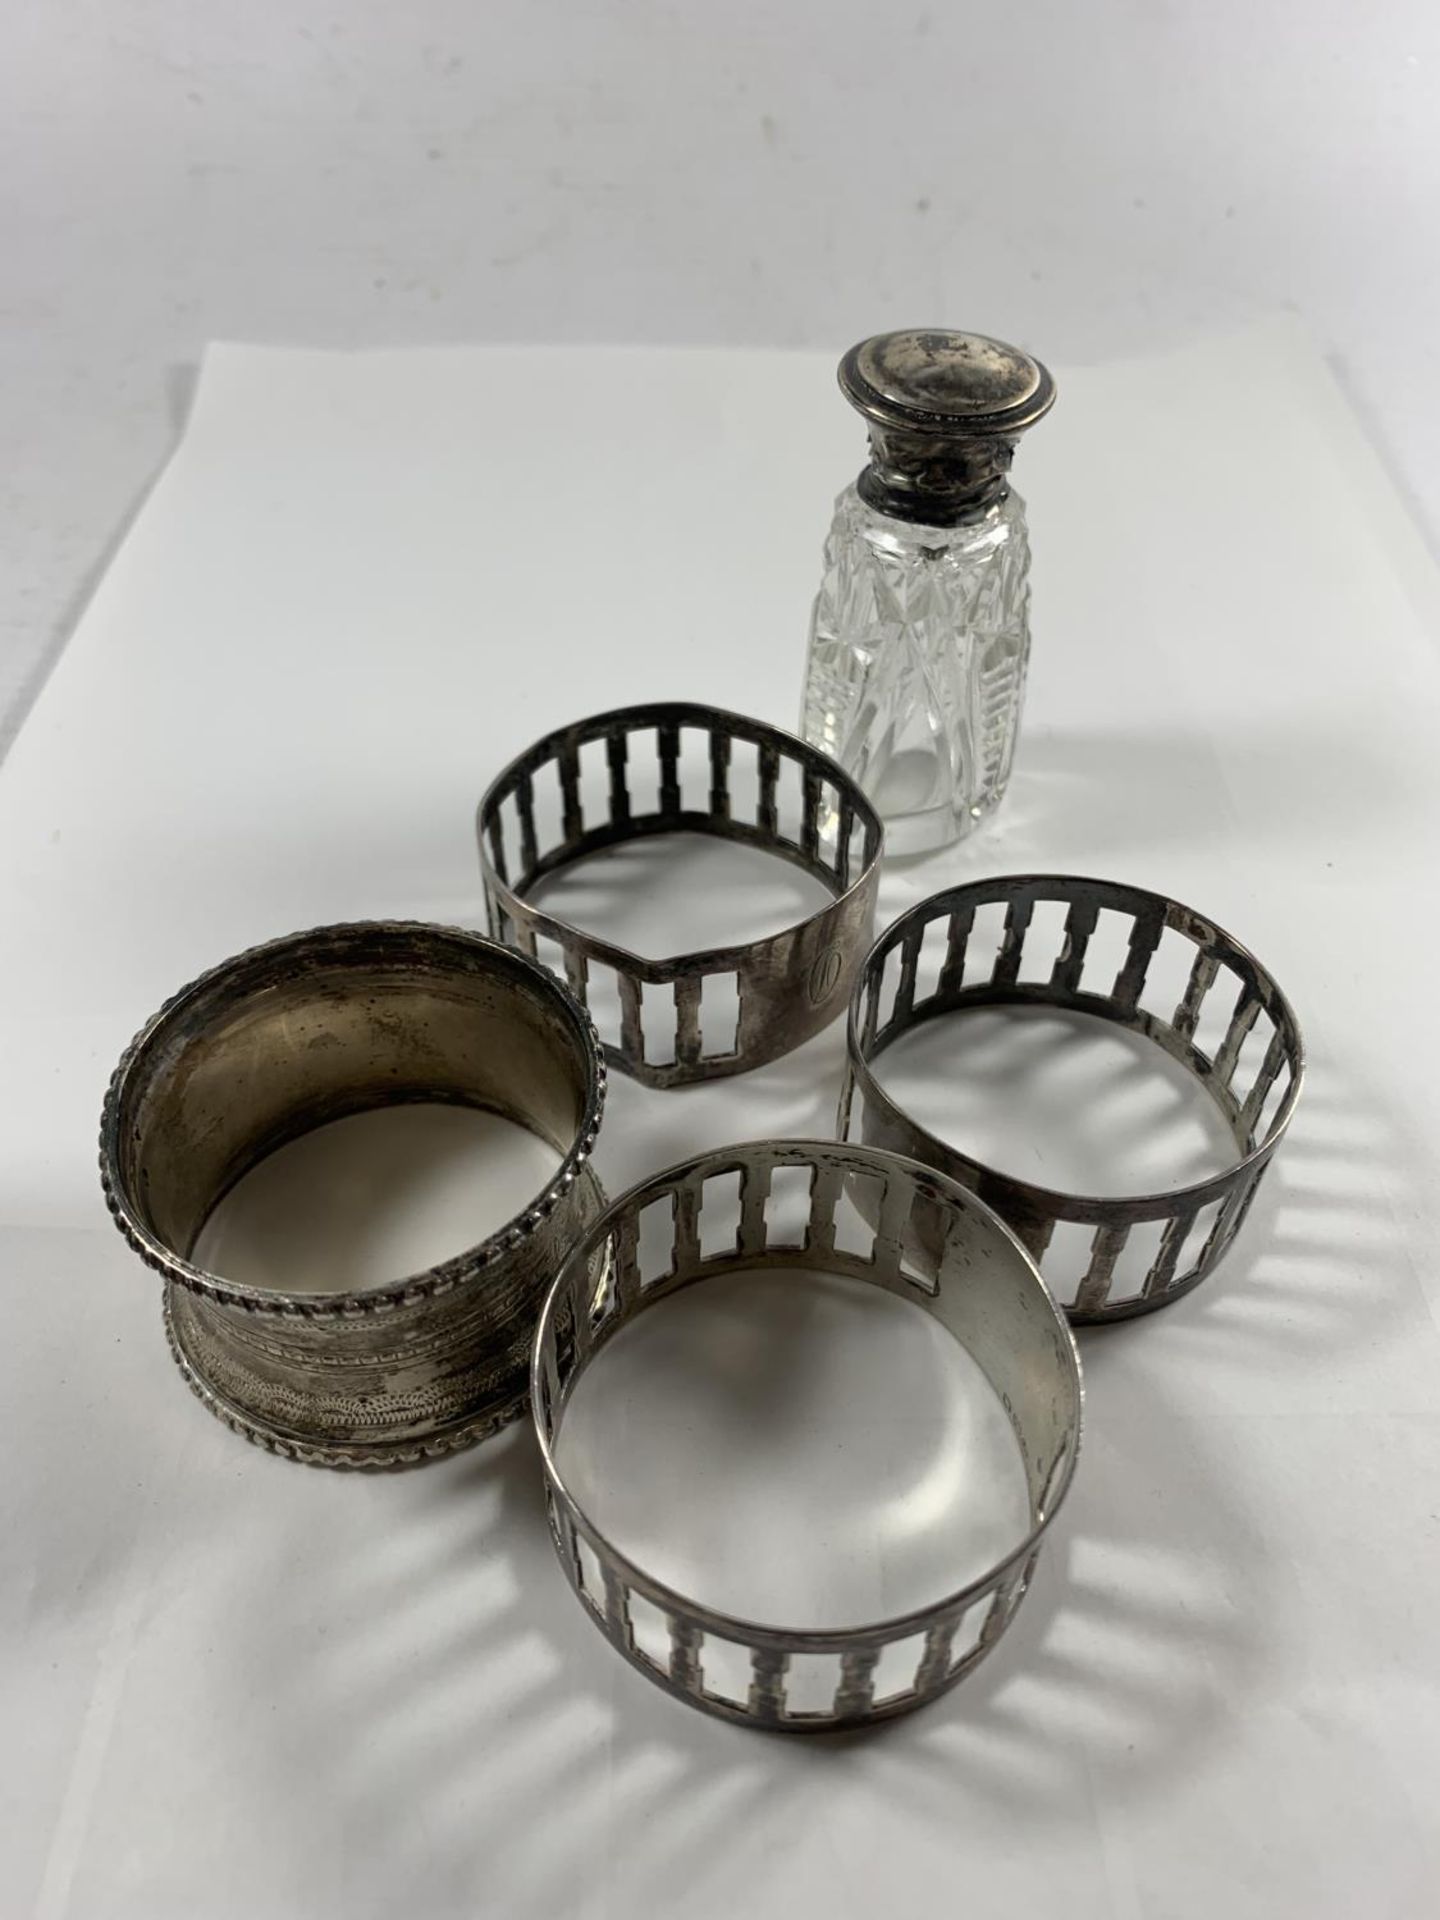 FOUR SILVER NAPKIN RINGS AND A SILVER LIDDED PERFUME BOTTLE WITH STOPPER